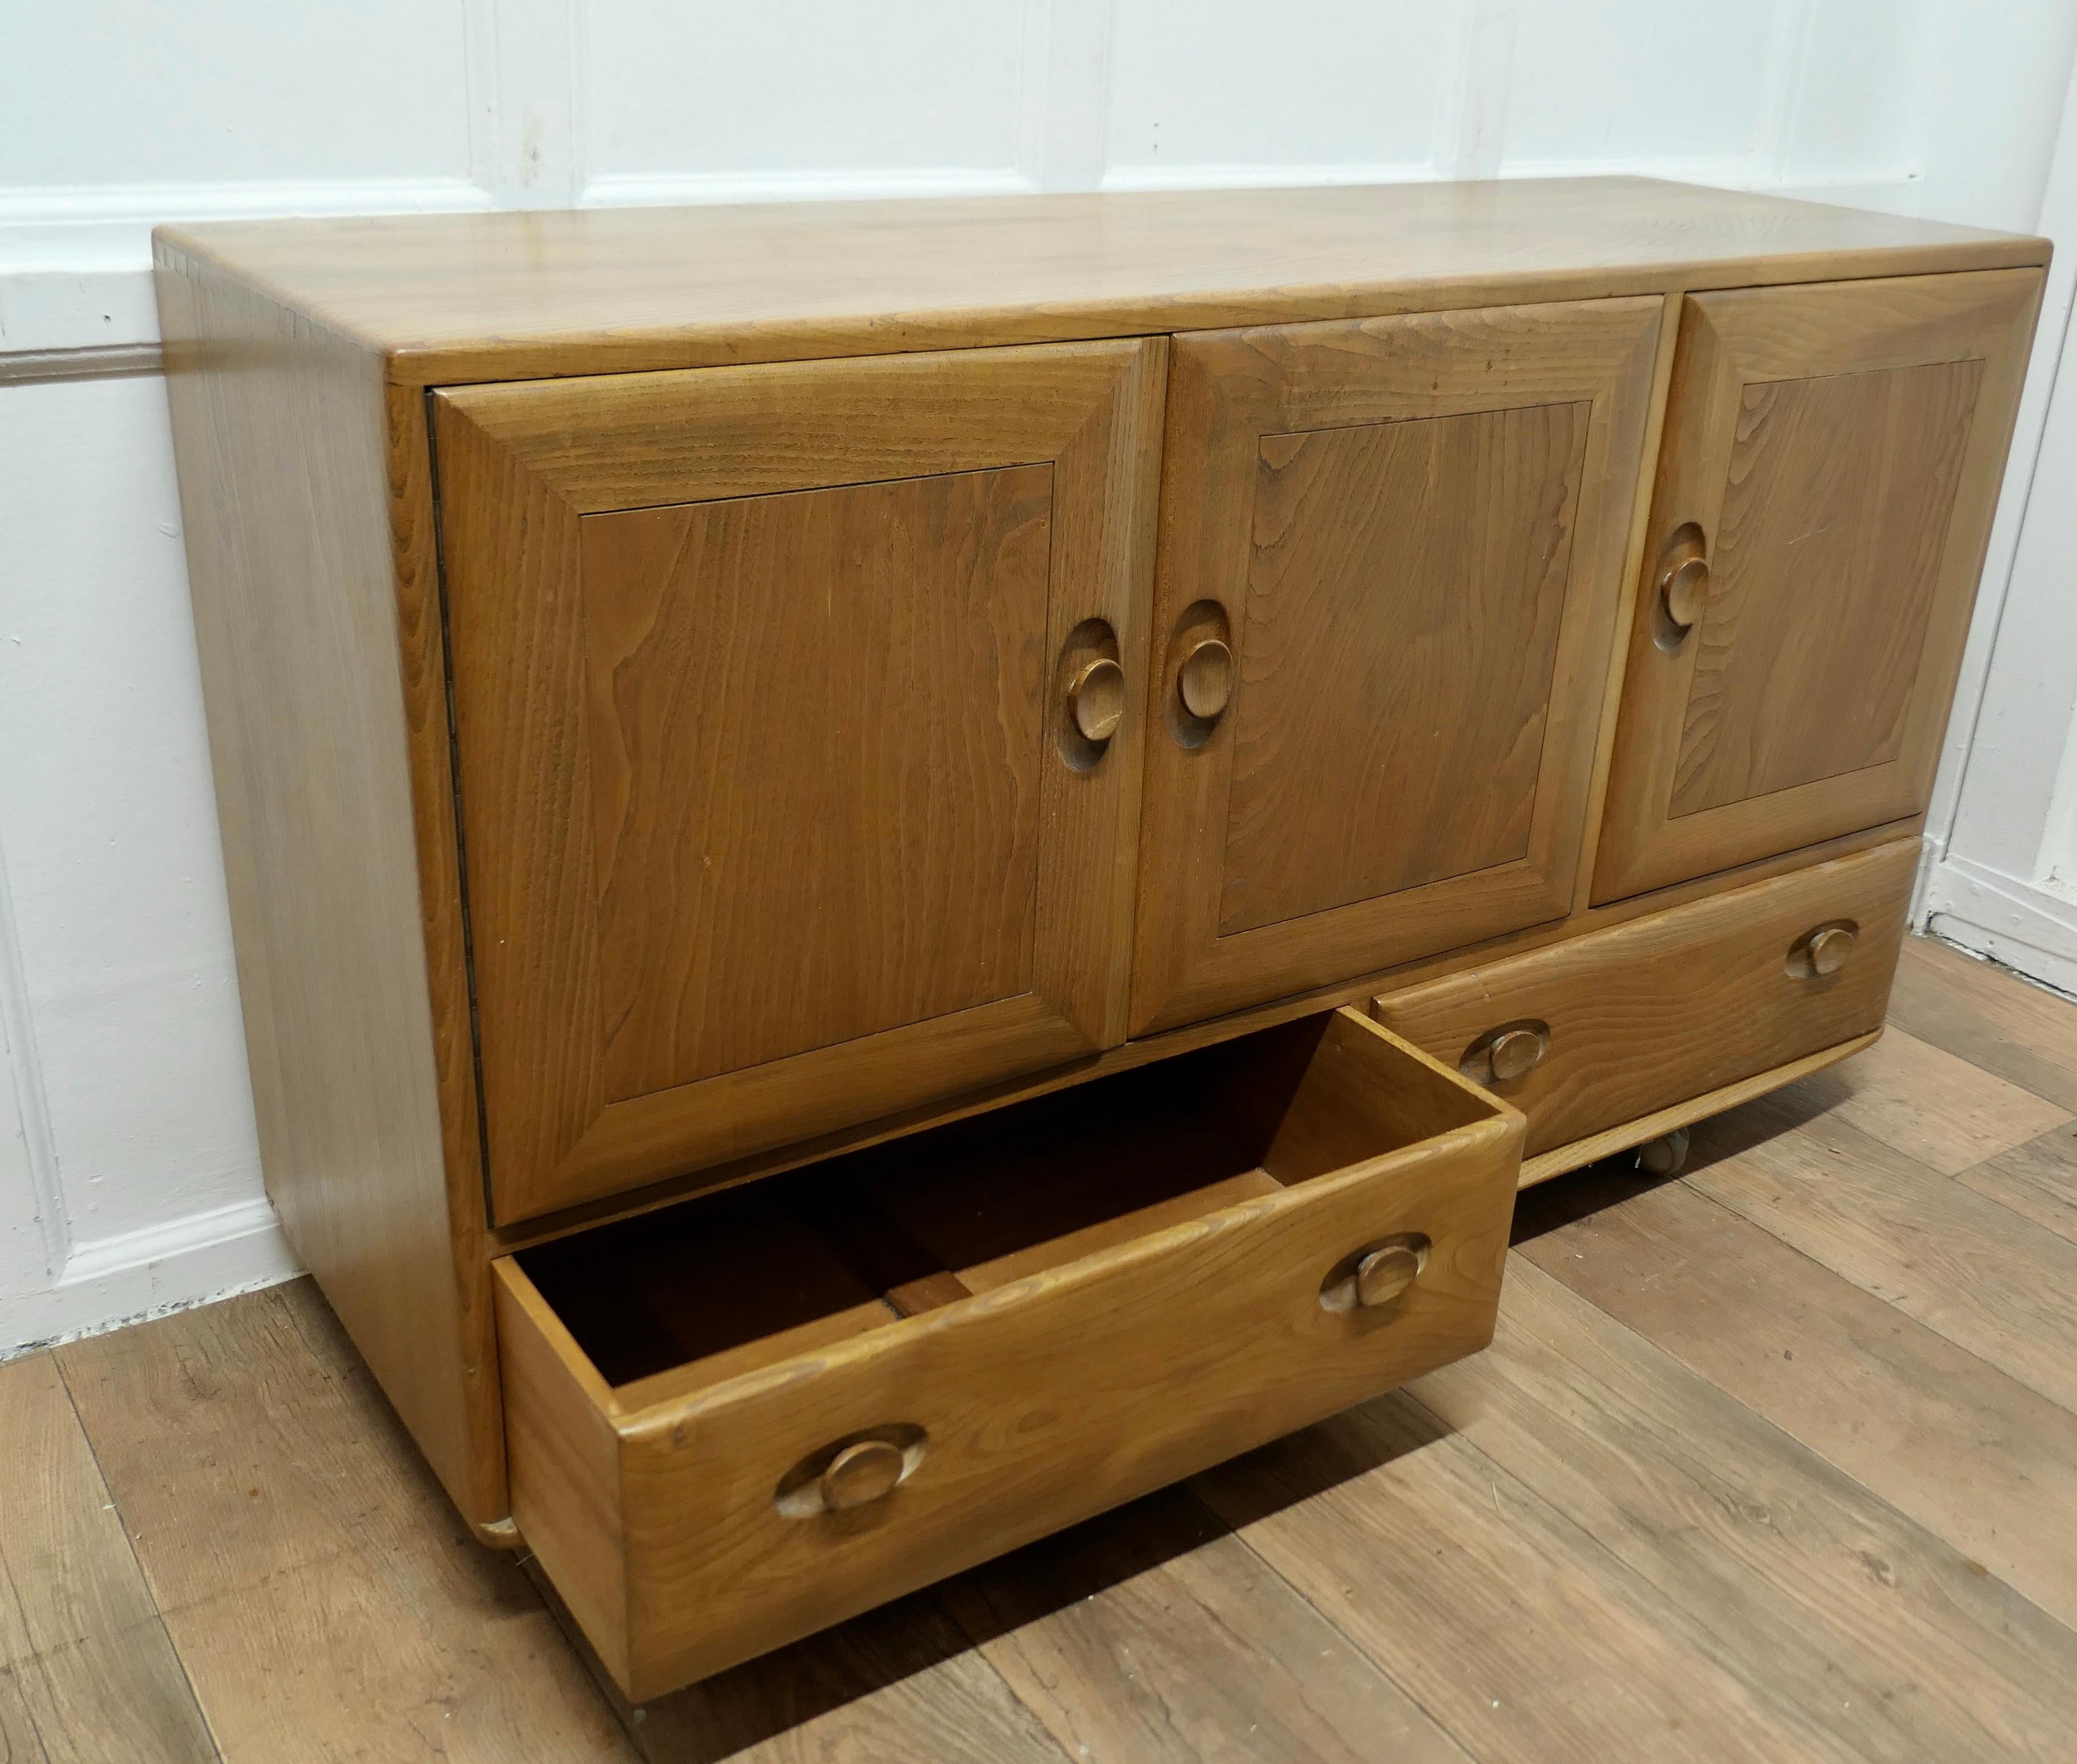 A Mid Century Golden Elm Sideboard by Ercol  The sideboard has 3 cupboard doors  2